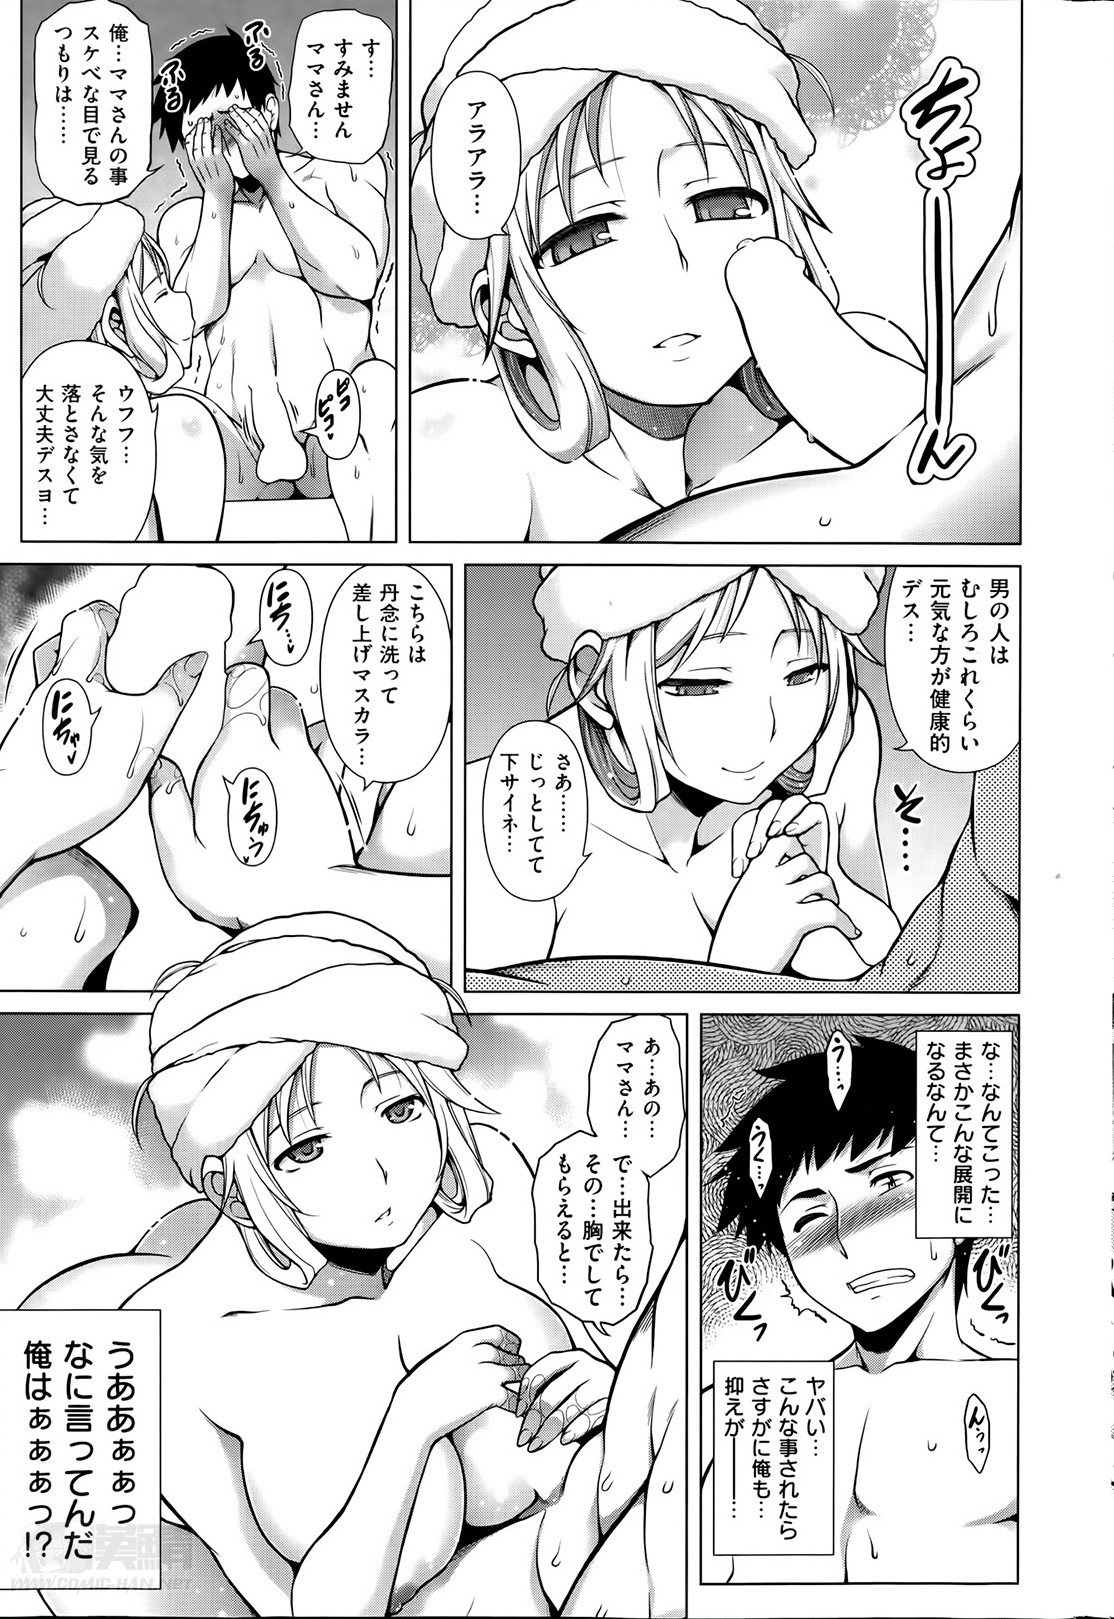 [TANABE] Ougon Taiken - Gold Experience page 5 full